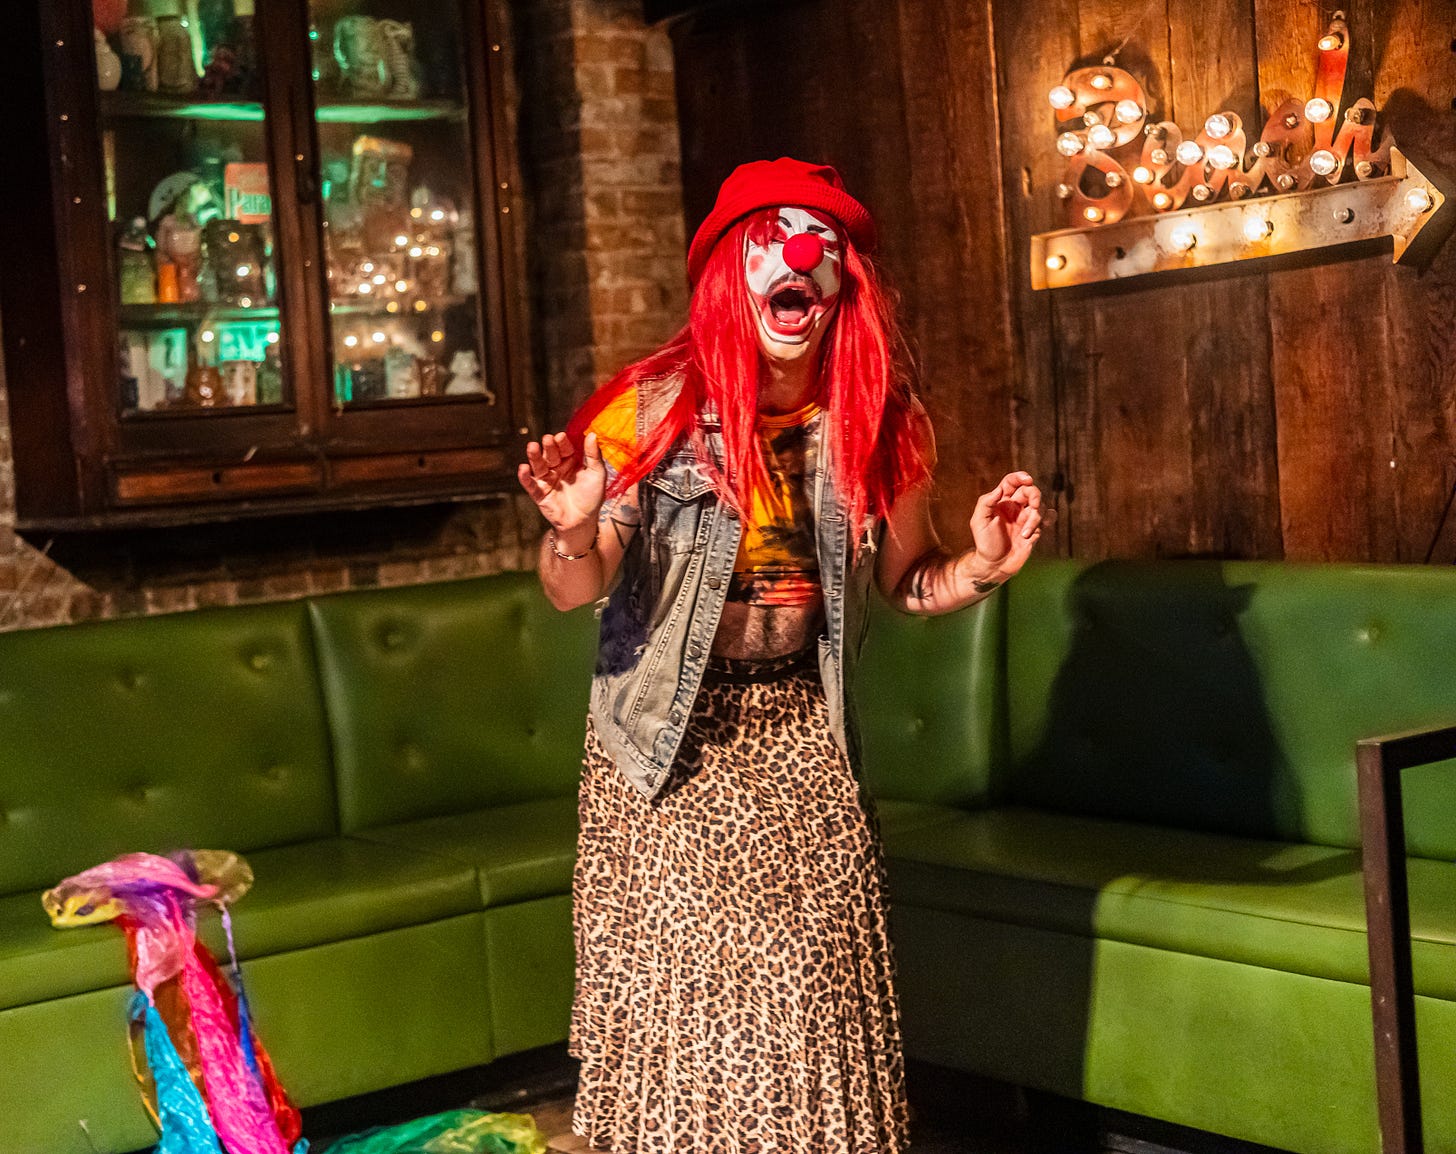 babz in long red wig and clown makeup and nose makes dramatic face onstage at queers n peers variety show